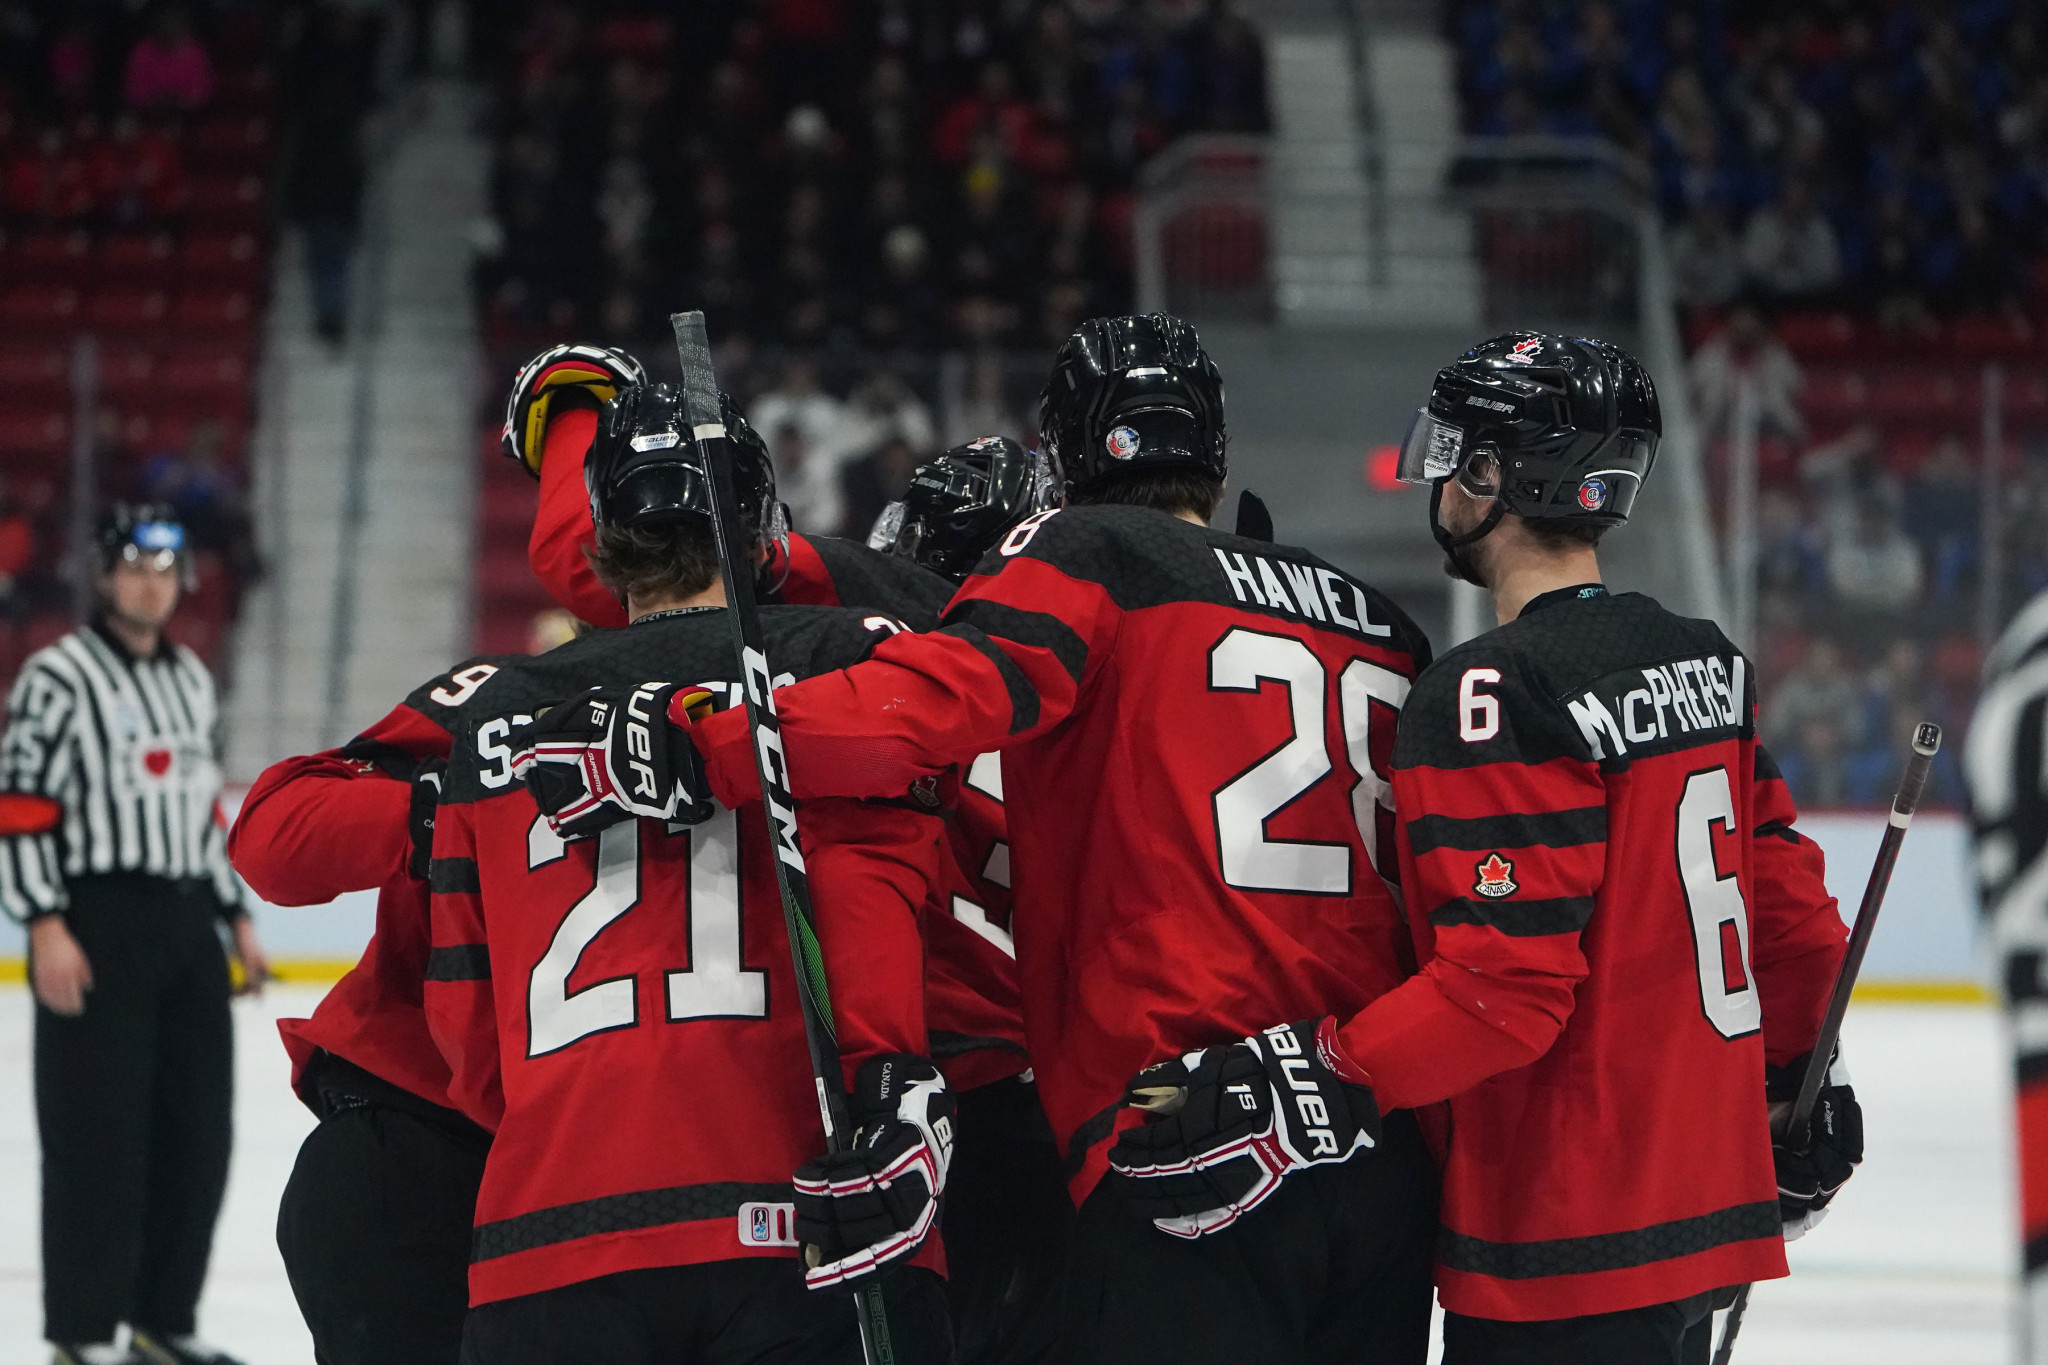 The victory marked the first time that Canada had won the gold medal since 2013 ©FISU